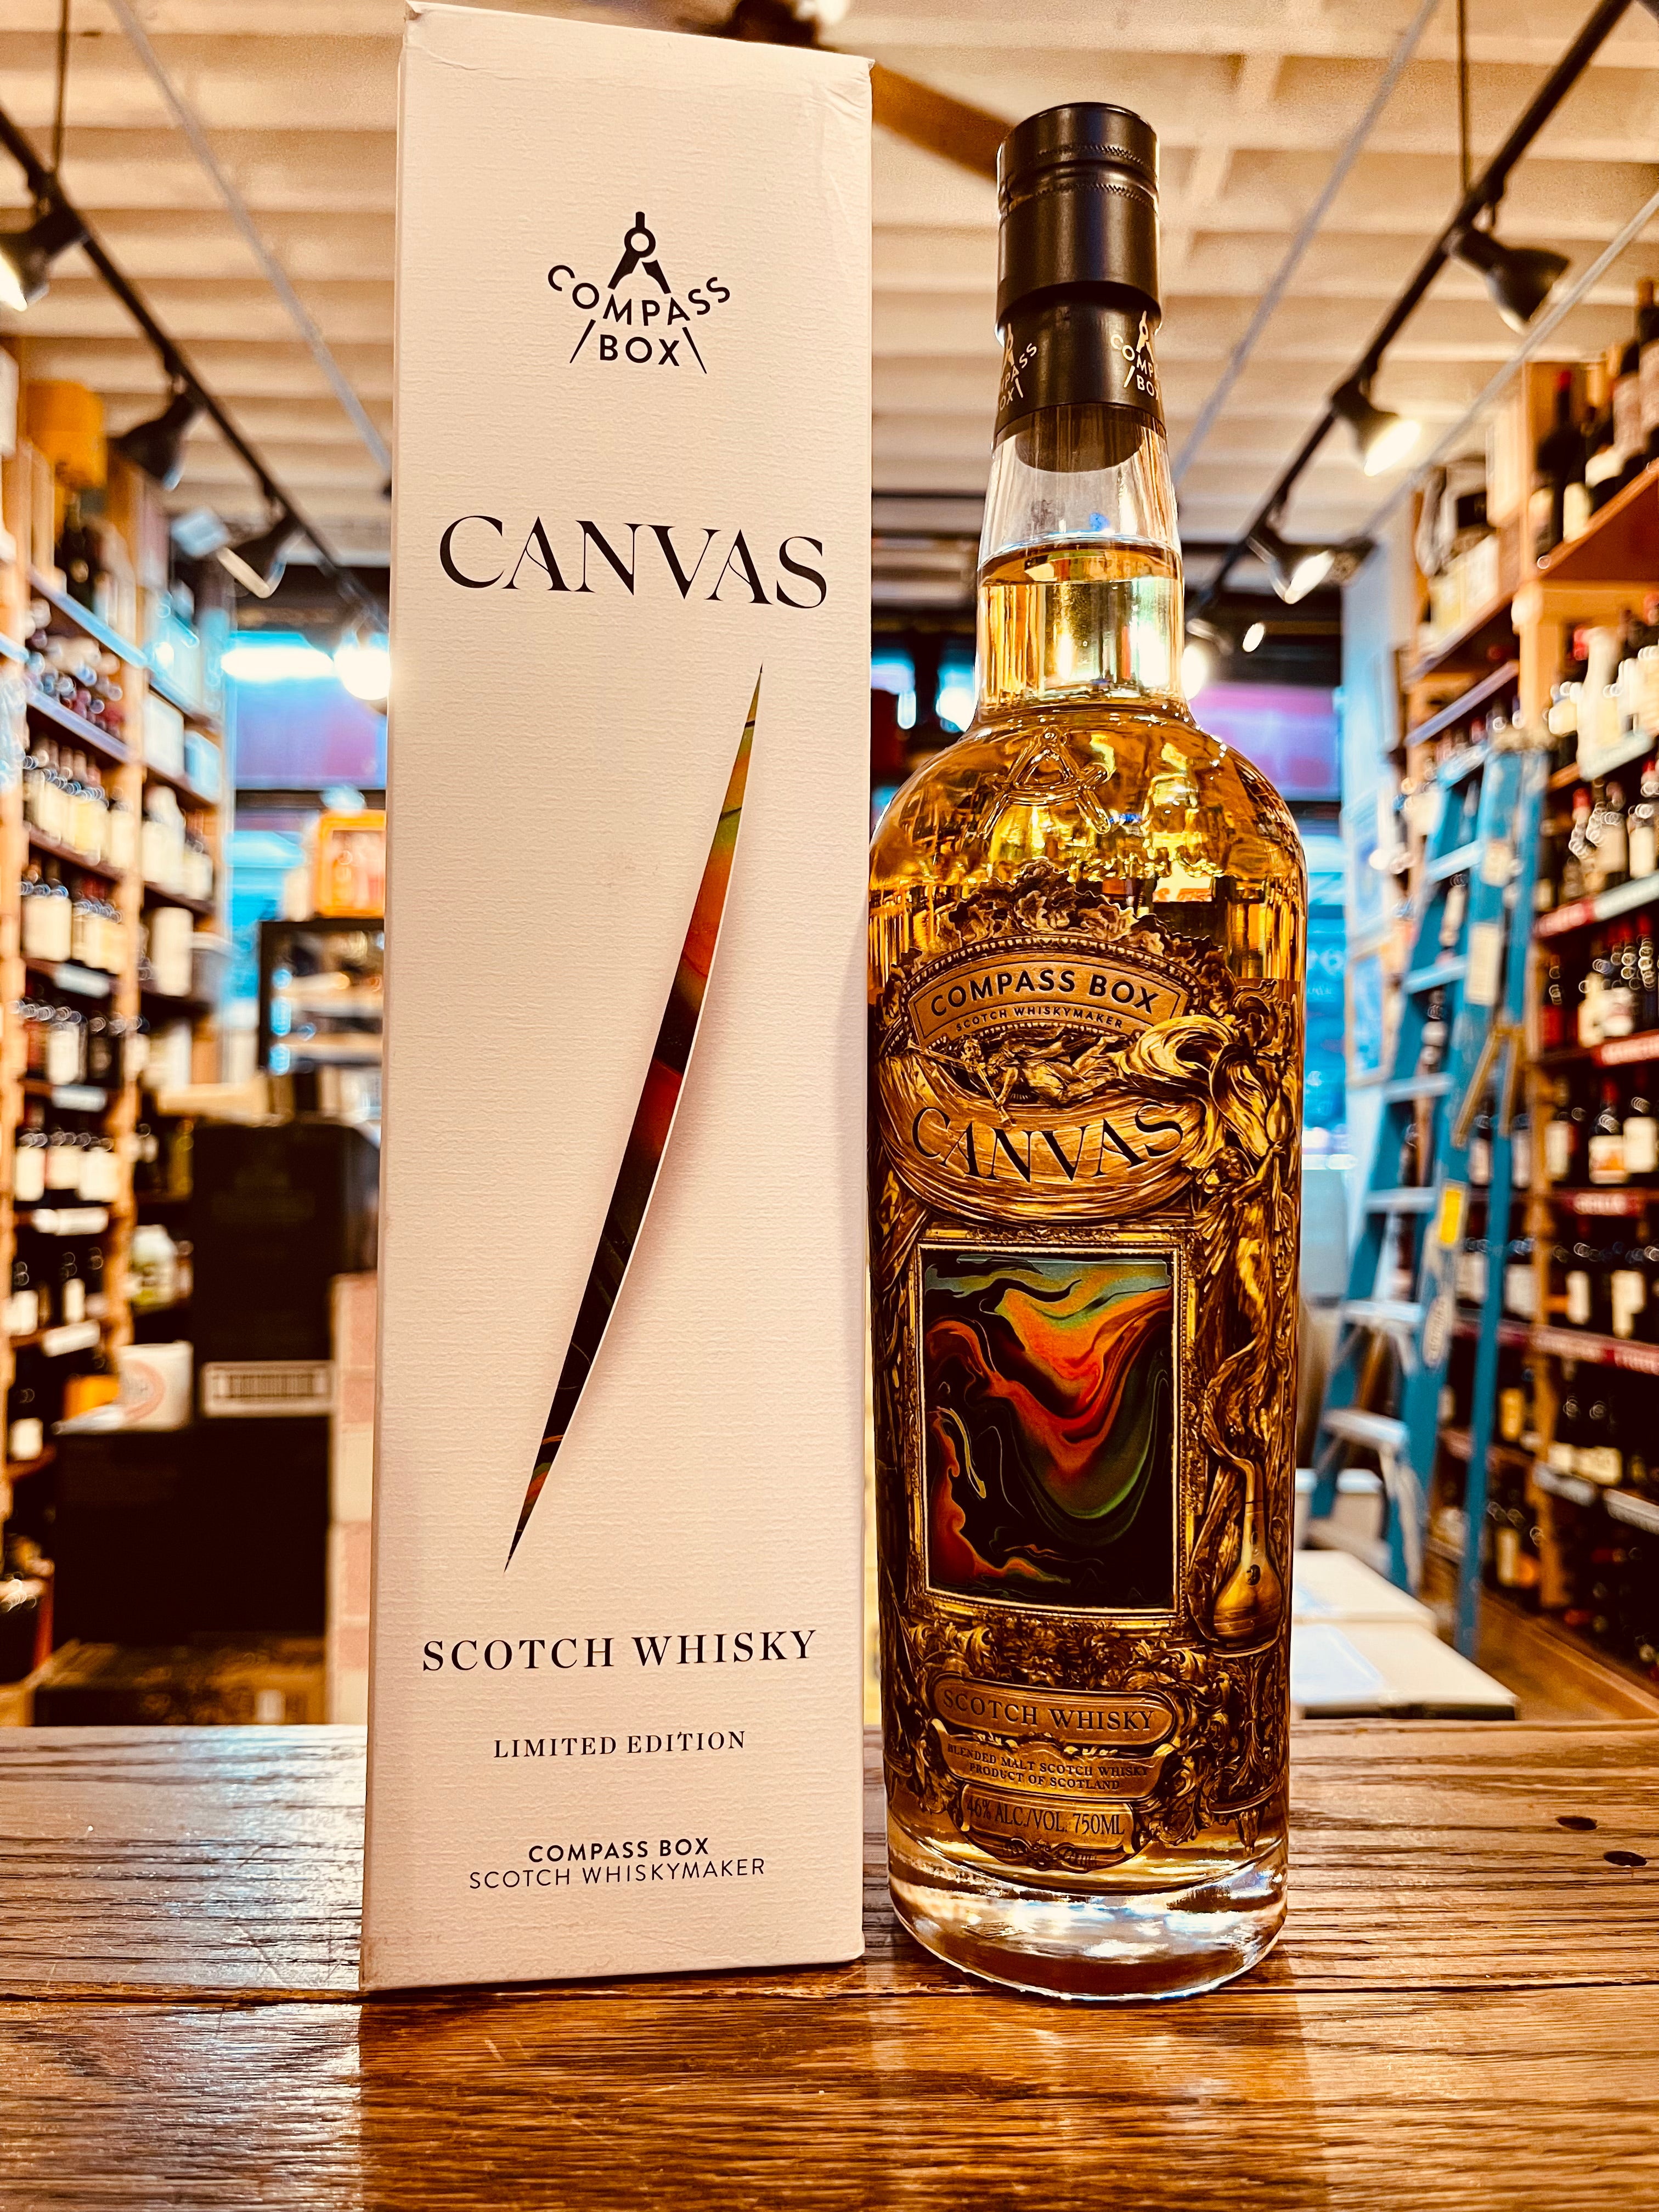 Compass Box Canvas Scotch Whisky Limited Edition 750mL